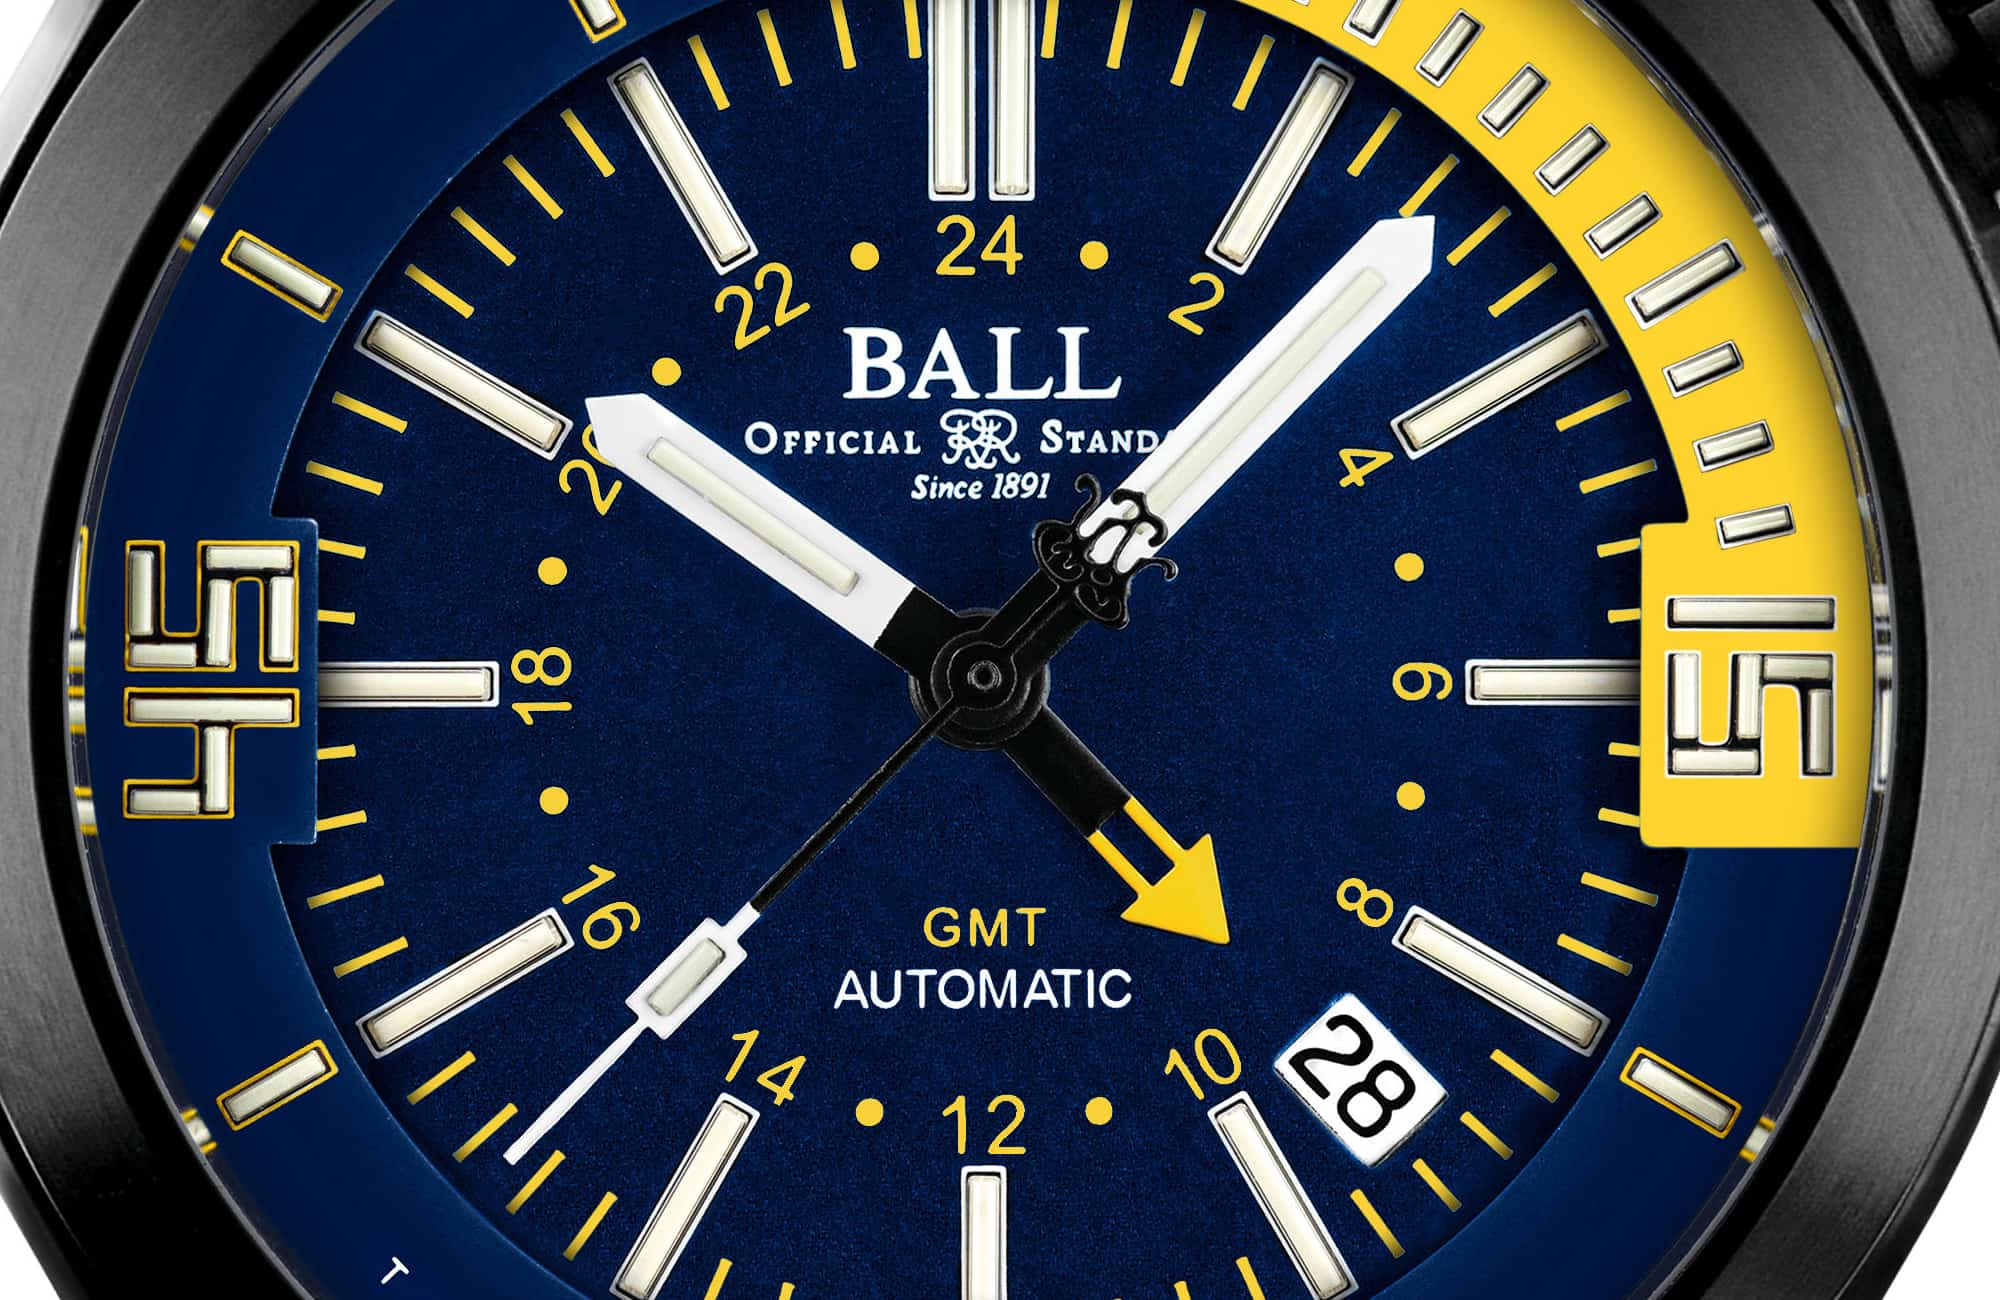 Introducing the BALL Engineer Master II Diver Series, Now Available for Pre-Order at a Special Price